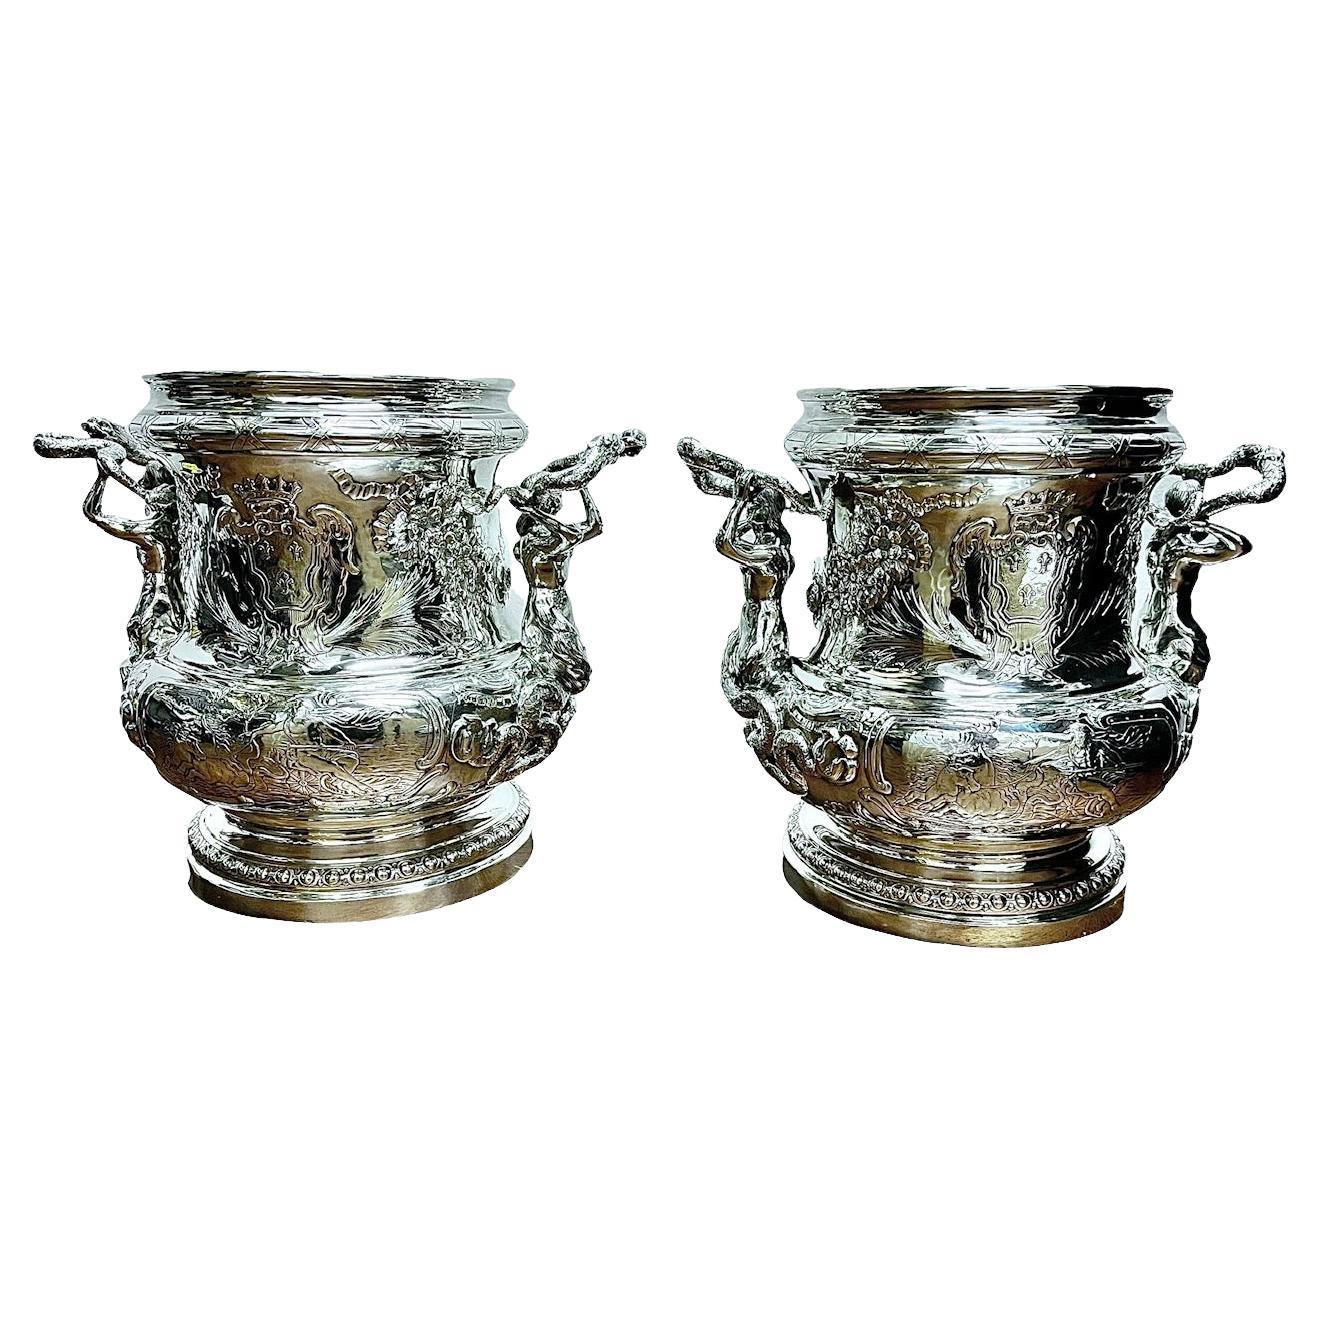 This exceptional pair of German Solid Sterling silver coolers, crafted in the year 1890, stands as a testament to the exquisite craftsmanship of their time. Created in the renowned workshops of Hanau by the skilled silversmith S. Rosineau and